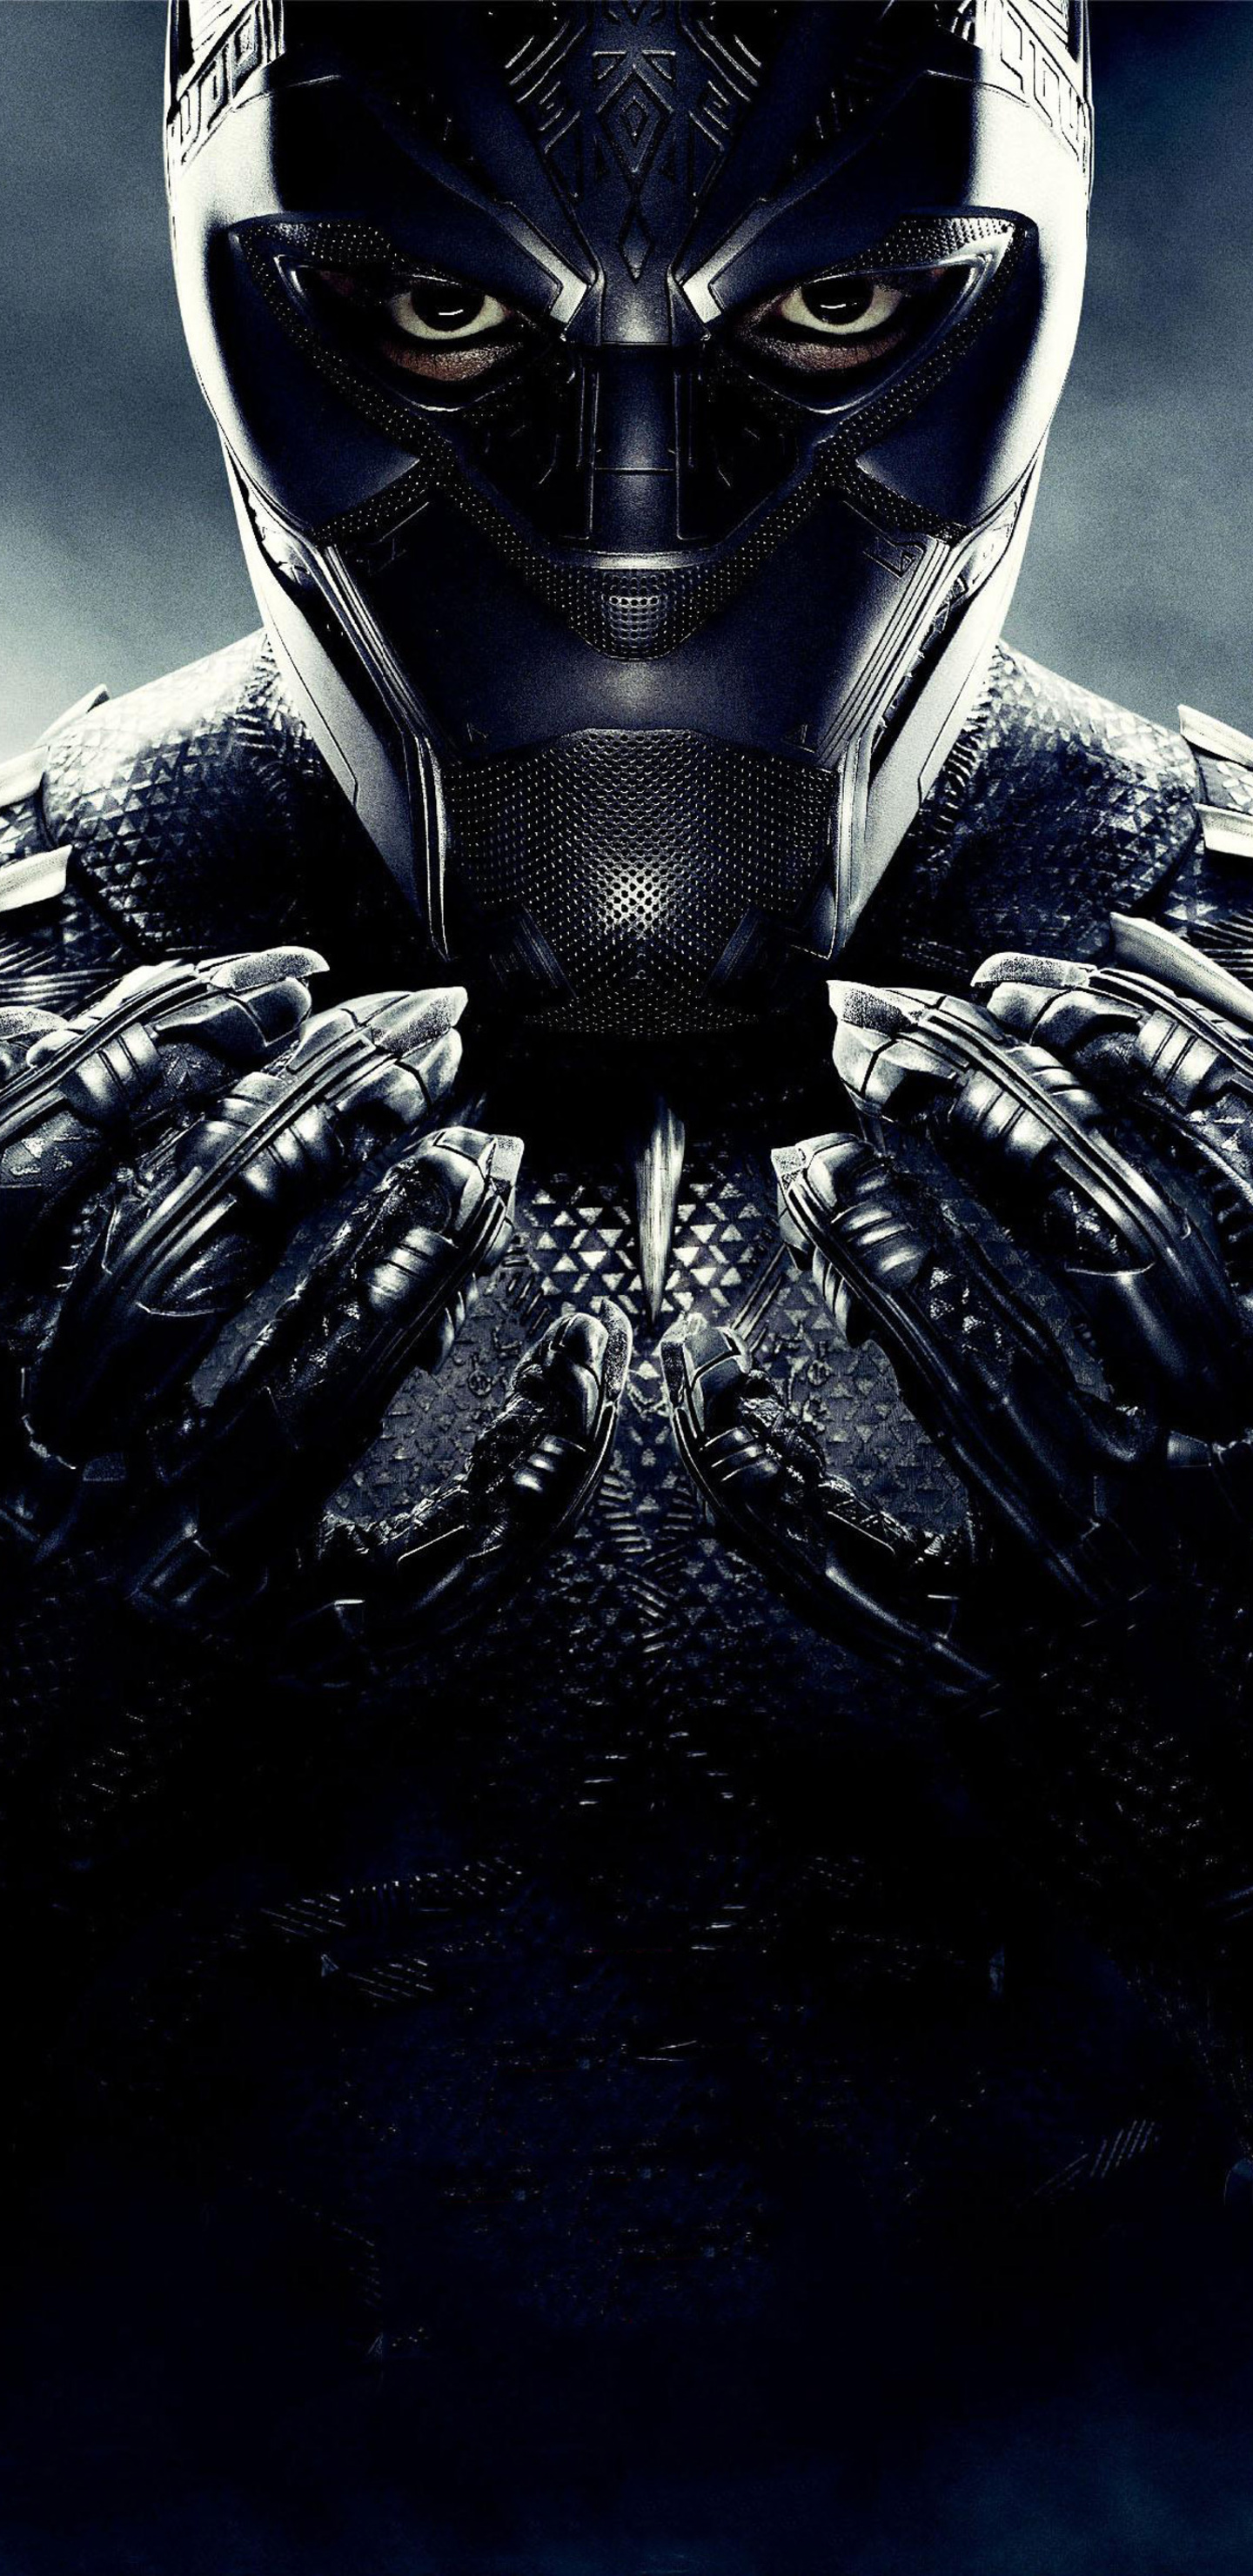 1440x2960 Black Panther 2018 Poster Samsung Galaxy Note 98 S9s8